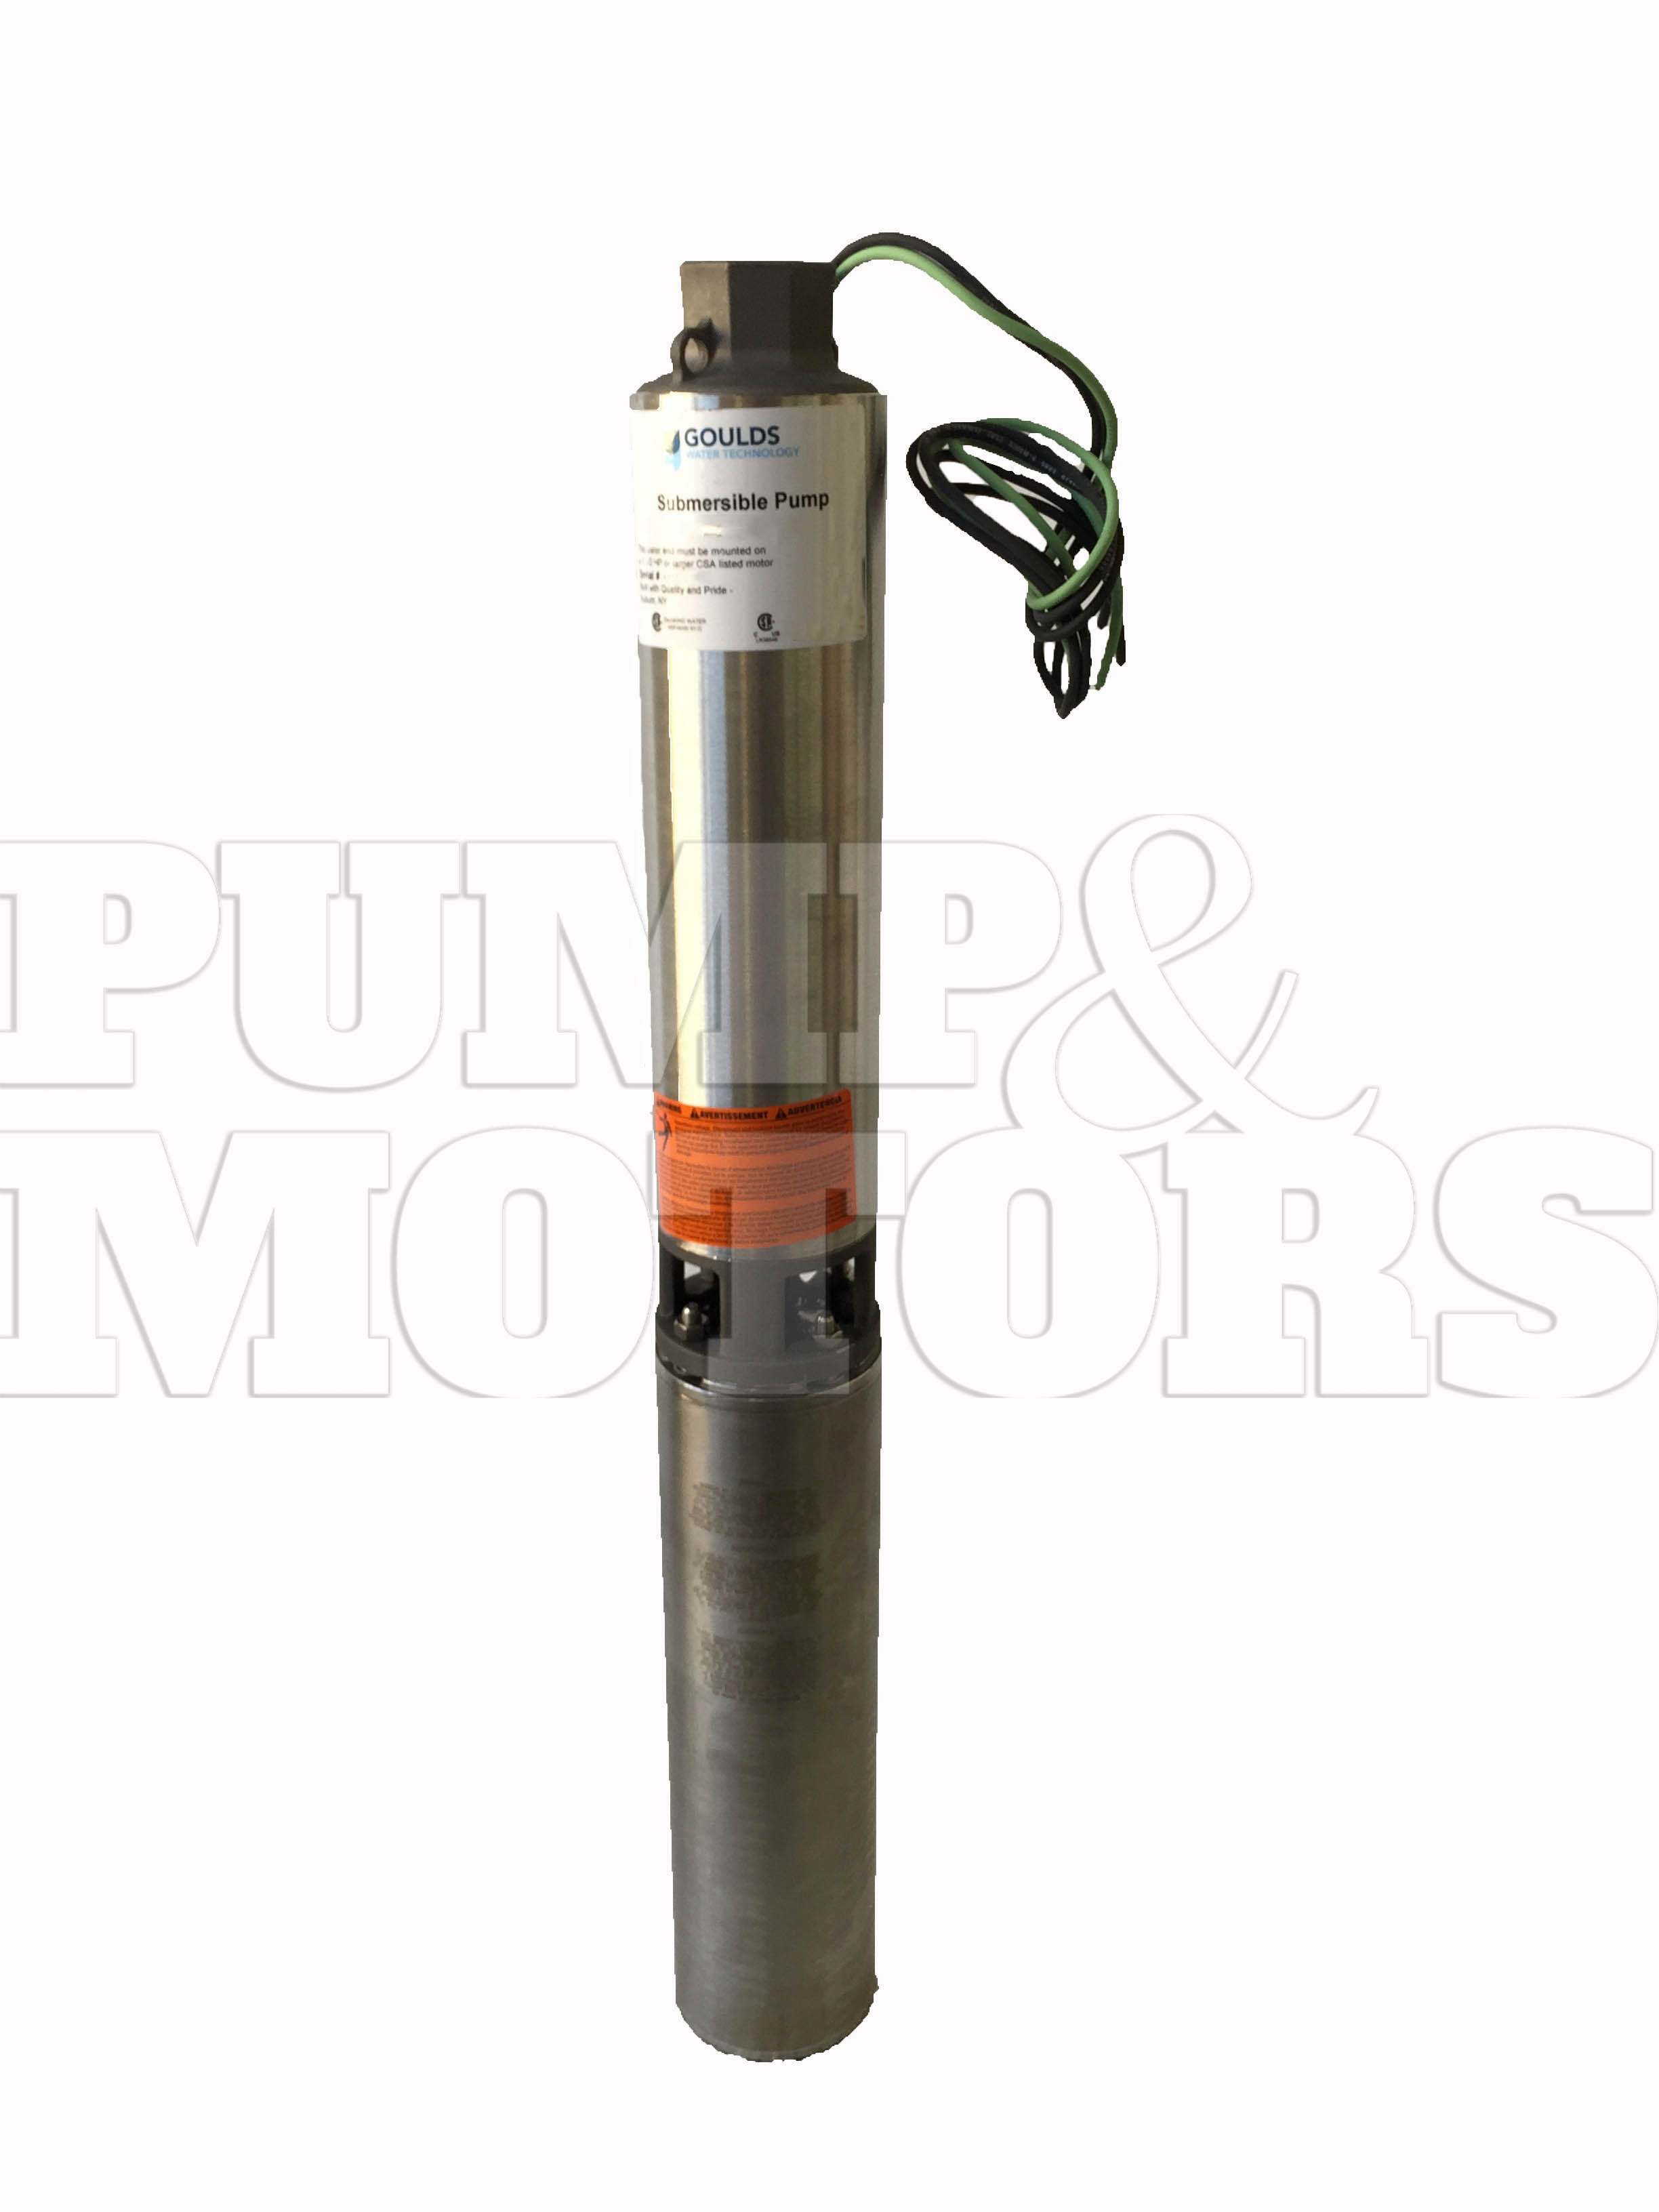 Goulds 10GS10422C 1 HP 230V Submersible Water Well Pump 10GPM